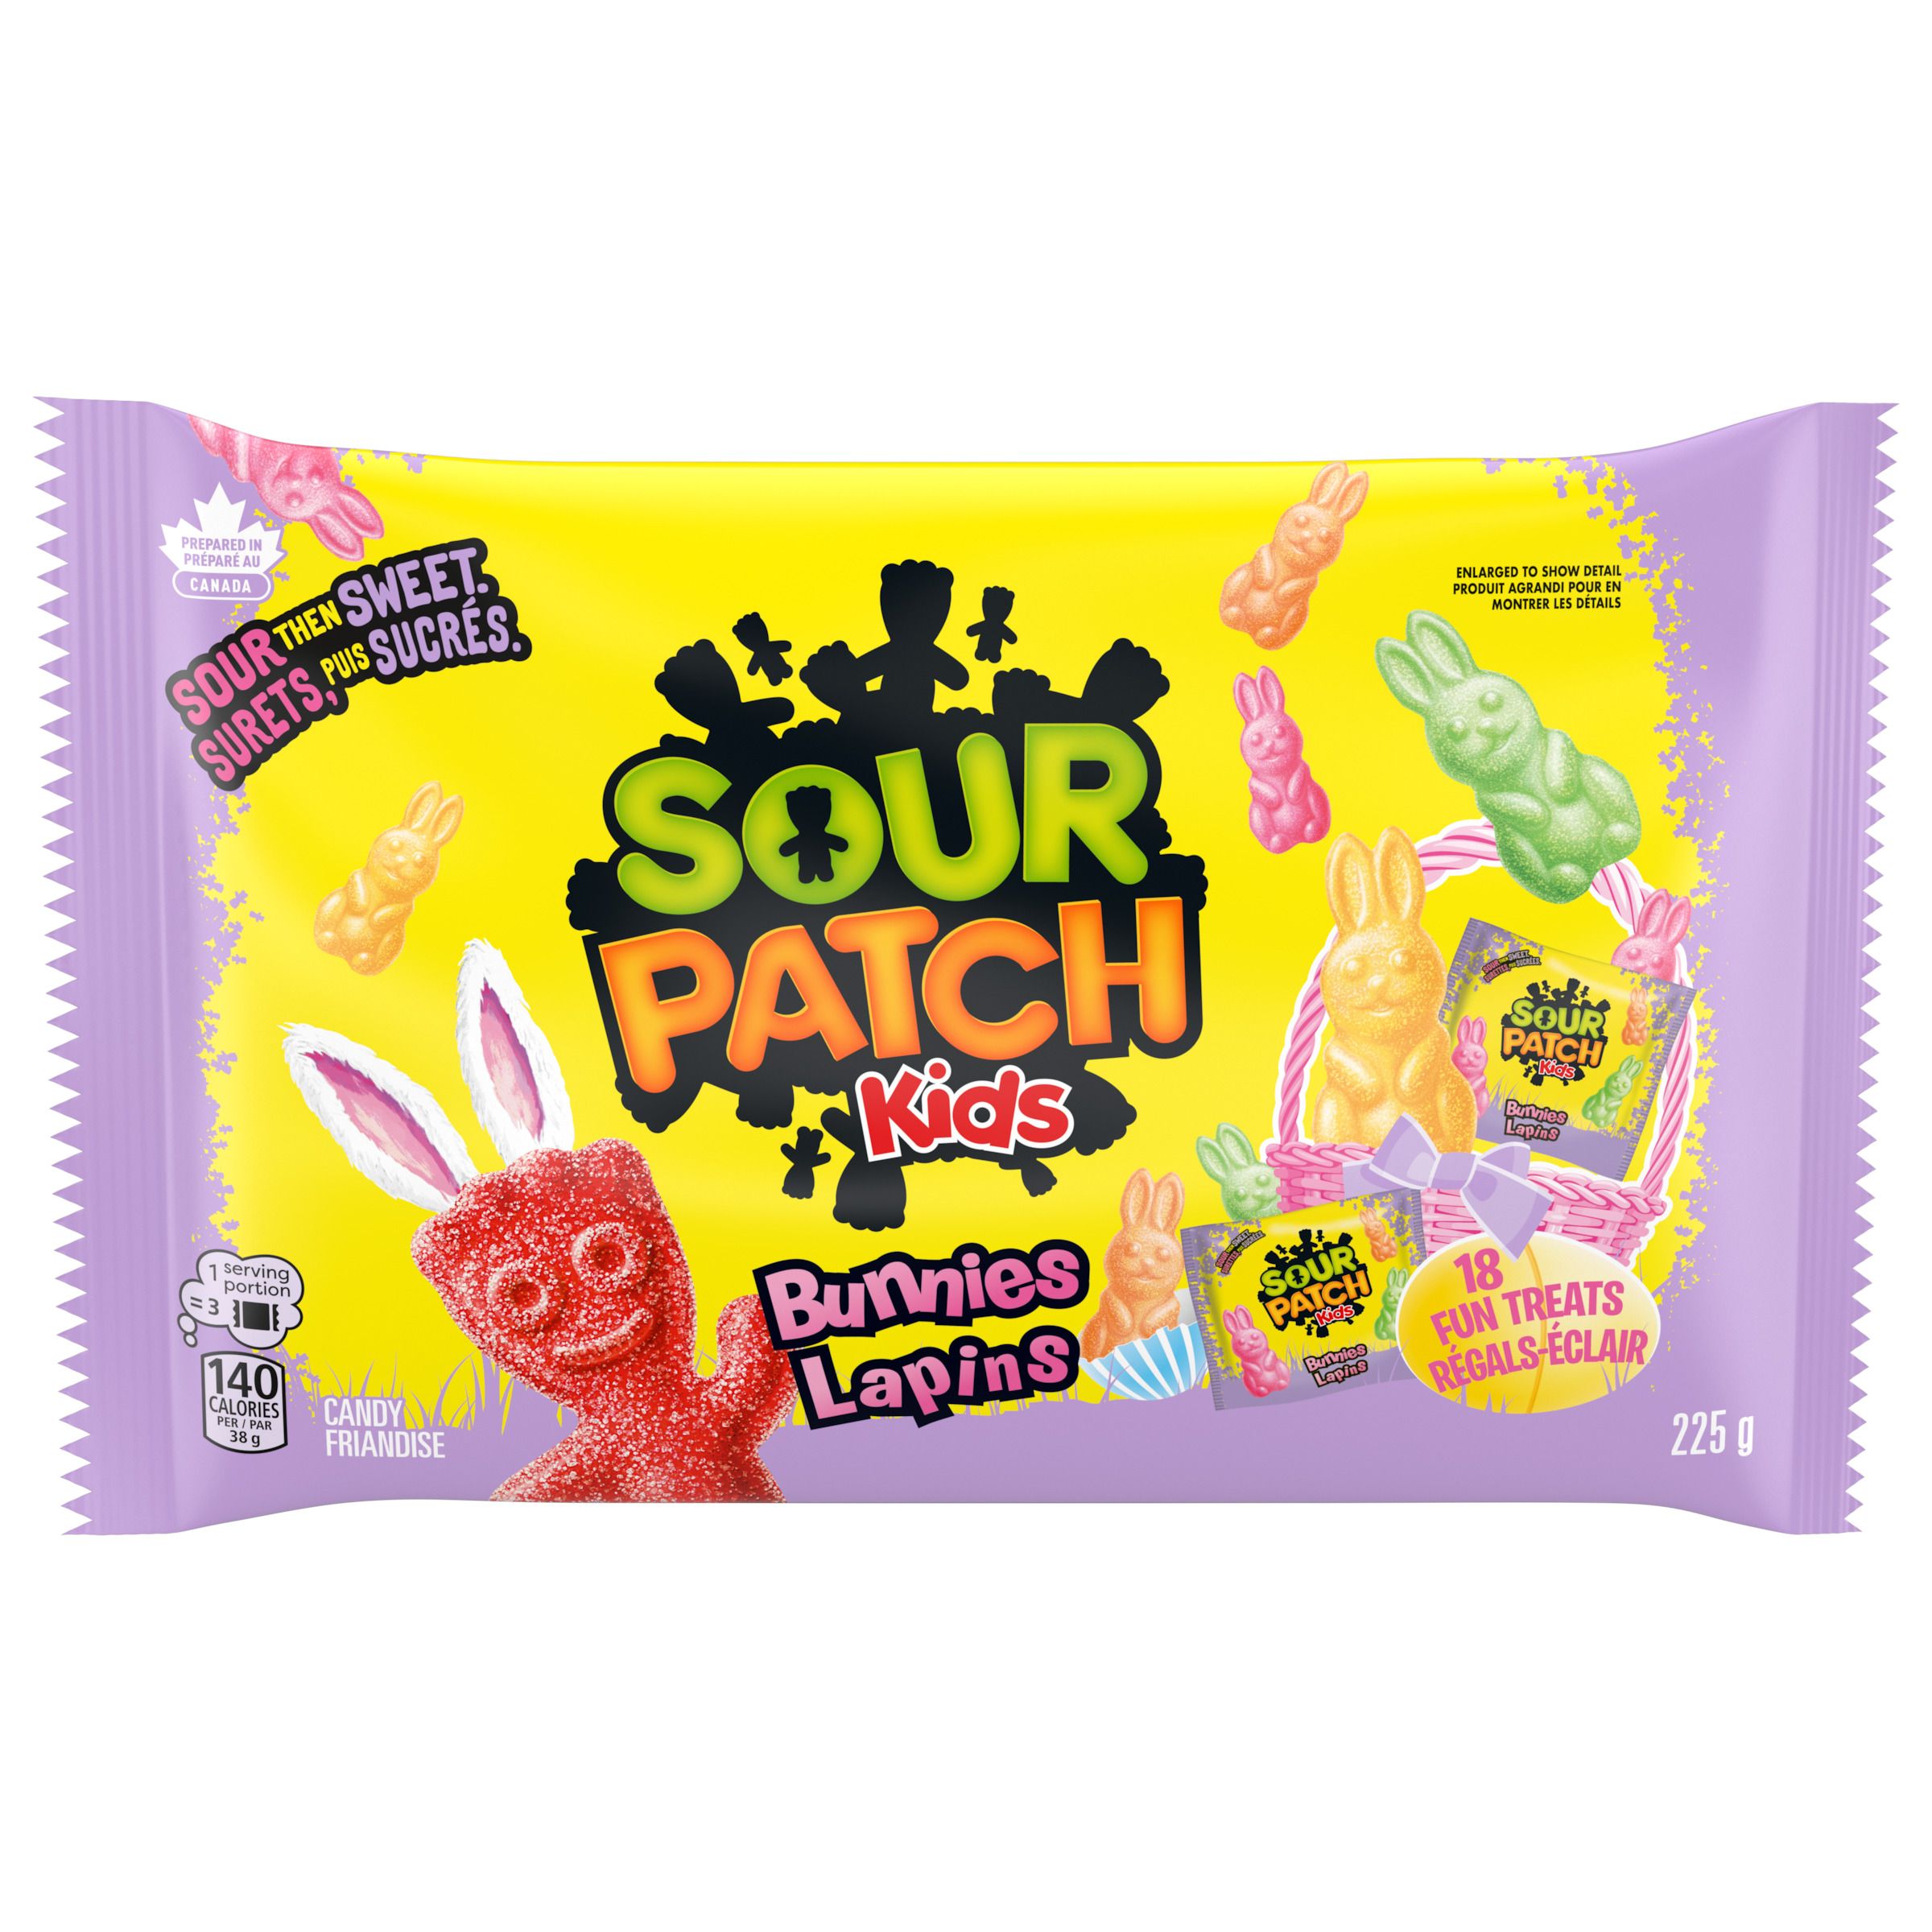 MAYNARDS Sour Patch Kids Bunnies Candy for Easter (225 g)